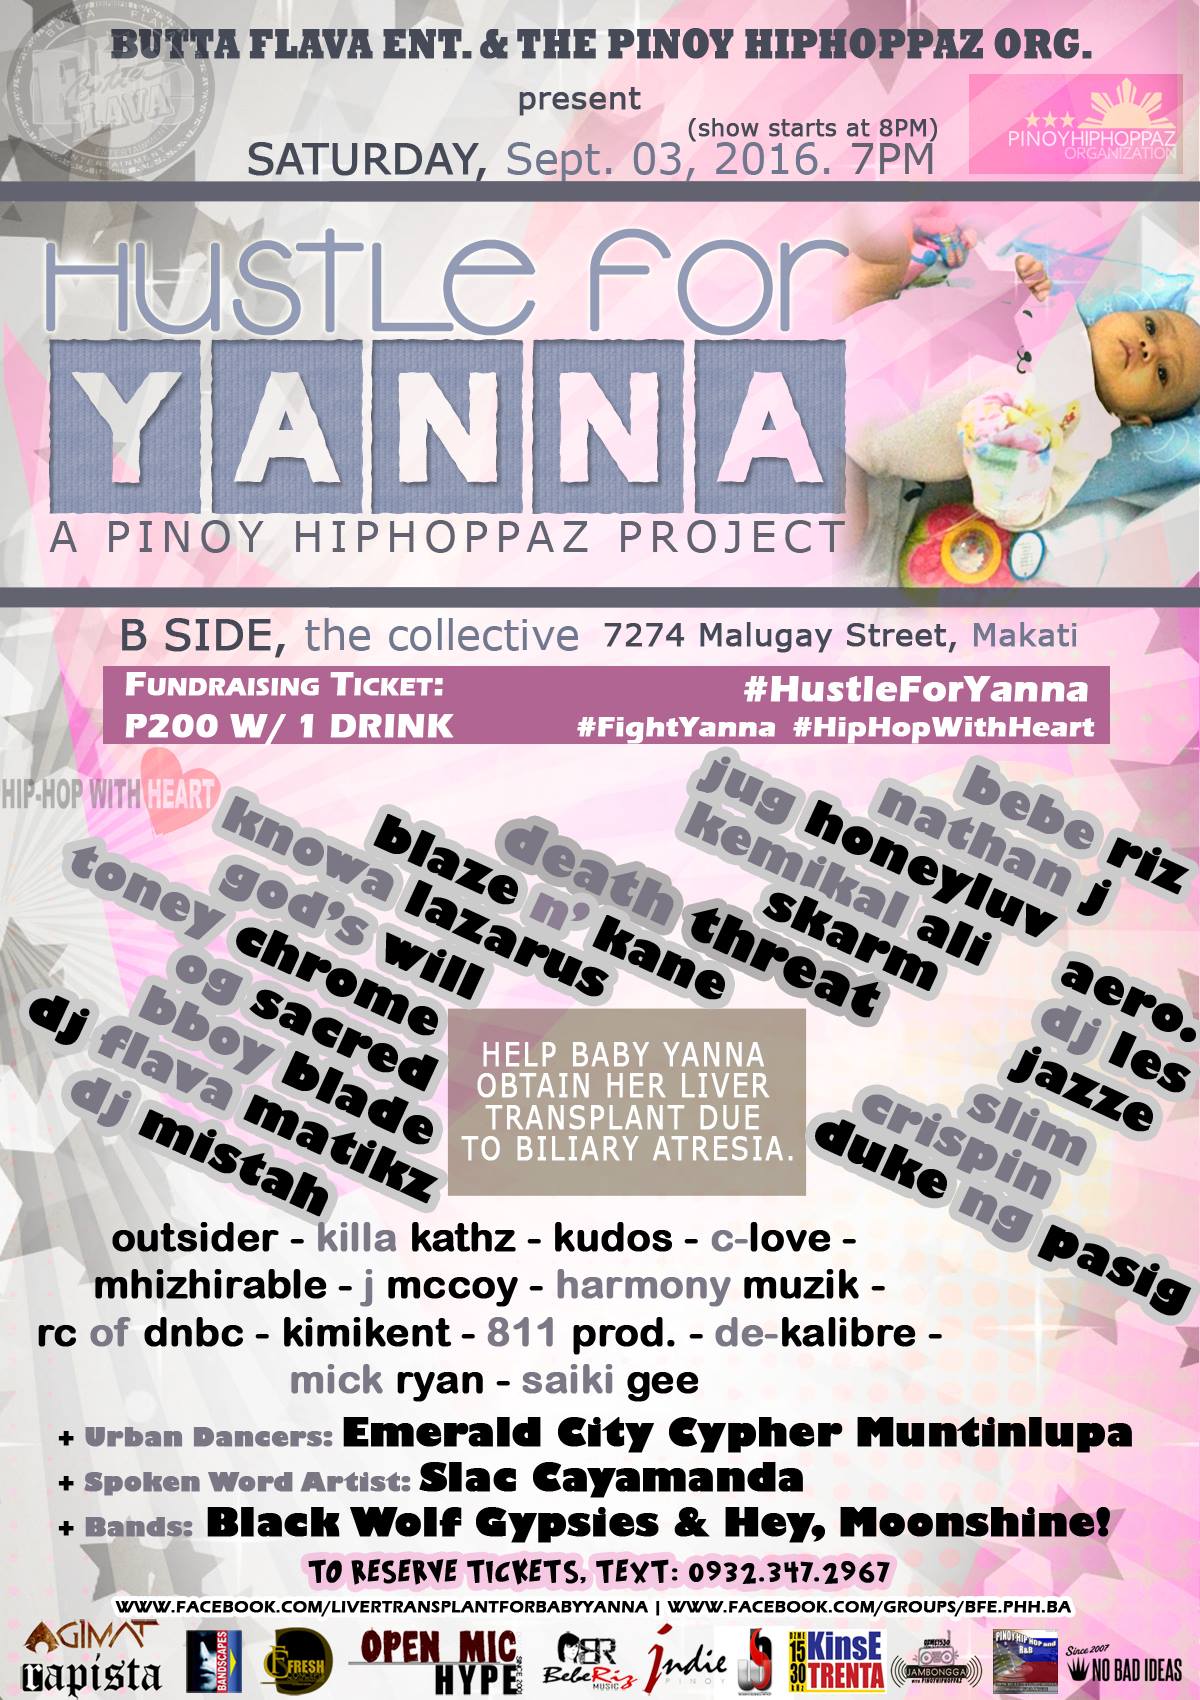 Hustle for Yanna: a Pinoy Hiphoppaz Project clock Saturday, September 3 at 7 PM - 2 AM Sep 3 at 7 PM to Sep 4 at 2 AM pin Show Map B-Side, The Collective 7274 Malugay Street, Makati, Philippines About Discussion Write Post Add Photo / Video Create Poll Details Butta-Flava Entertainment [BFe] https://web.facebook.com/BFe.Official and The Pinoy Hiphoppaz Organization [PHH] https://web.facebook.com/phh.org Present HUSTLE FOR YANNA: A Pinoy Hiphoppaz Project [The 6th way to help babies who need Liver Transplants due to Biliary Atresia.] - #HustleForBabies with BA Saturday, Sept. 03, 2016, 7pm B-Side, The Collective Malugay St., Makati City FUNDRAISING TICKET: P200 w/1 drink TO RESERVE TICKETS, TEXT: 0932.347.2967 or write: Jug Honeyluv Ramos or Bebe Riz Braga This event is a mini-concert for a cause to help raise funds and awareness for Baby Yanna so she can obtain a Liver Transplant as she suffers from Biliary Atresia. On the Deck: DJ Les Hosted by: MC J-Luv Performances By: Death Threat | Kemikal Ali | God's Will | Blaze 'n Kane | Skarm | Bebe Riz | Jug Honeyluv | Jazze | Slim | Crispin | Toney Chrome | OG Sacred | Duke ng Pasig | Outsider | C-Love | Killa Kathz | Mhizhirable | J Mccoy | Harmony Muzik | RC of DNBC | Kimikent | 811 Prod | De-Kalibre | Mick Ryan | Saiki Gee and more! + Urban Dancers: Emerald City Cypher Muntinlupa + Spoken Word Artists: Slac and White Wall Poetry + Bands: Black Wolf Gypsies Hey, Moonshine! *IF YOU ARE INTERESTED TO SHARE YOUR TIME & TALENT, CONTACT US BY SENDING A PM (private message) to: The Pinoy Hiphoppaz Organization. Performance line-up is open! This is open to rappers, singers, spoken-word artists, dancers, DJs. Graffiti writers are also welcome to participate. Of course, if you cannot perform/participate, purchasing a ticket will be a great help to baby Yanna. INFO ON THE BENEFICIARY: Name: Dianna Dominique Dizon (Baby Yanna) Fb page: https://www.facebook.c